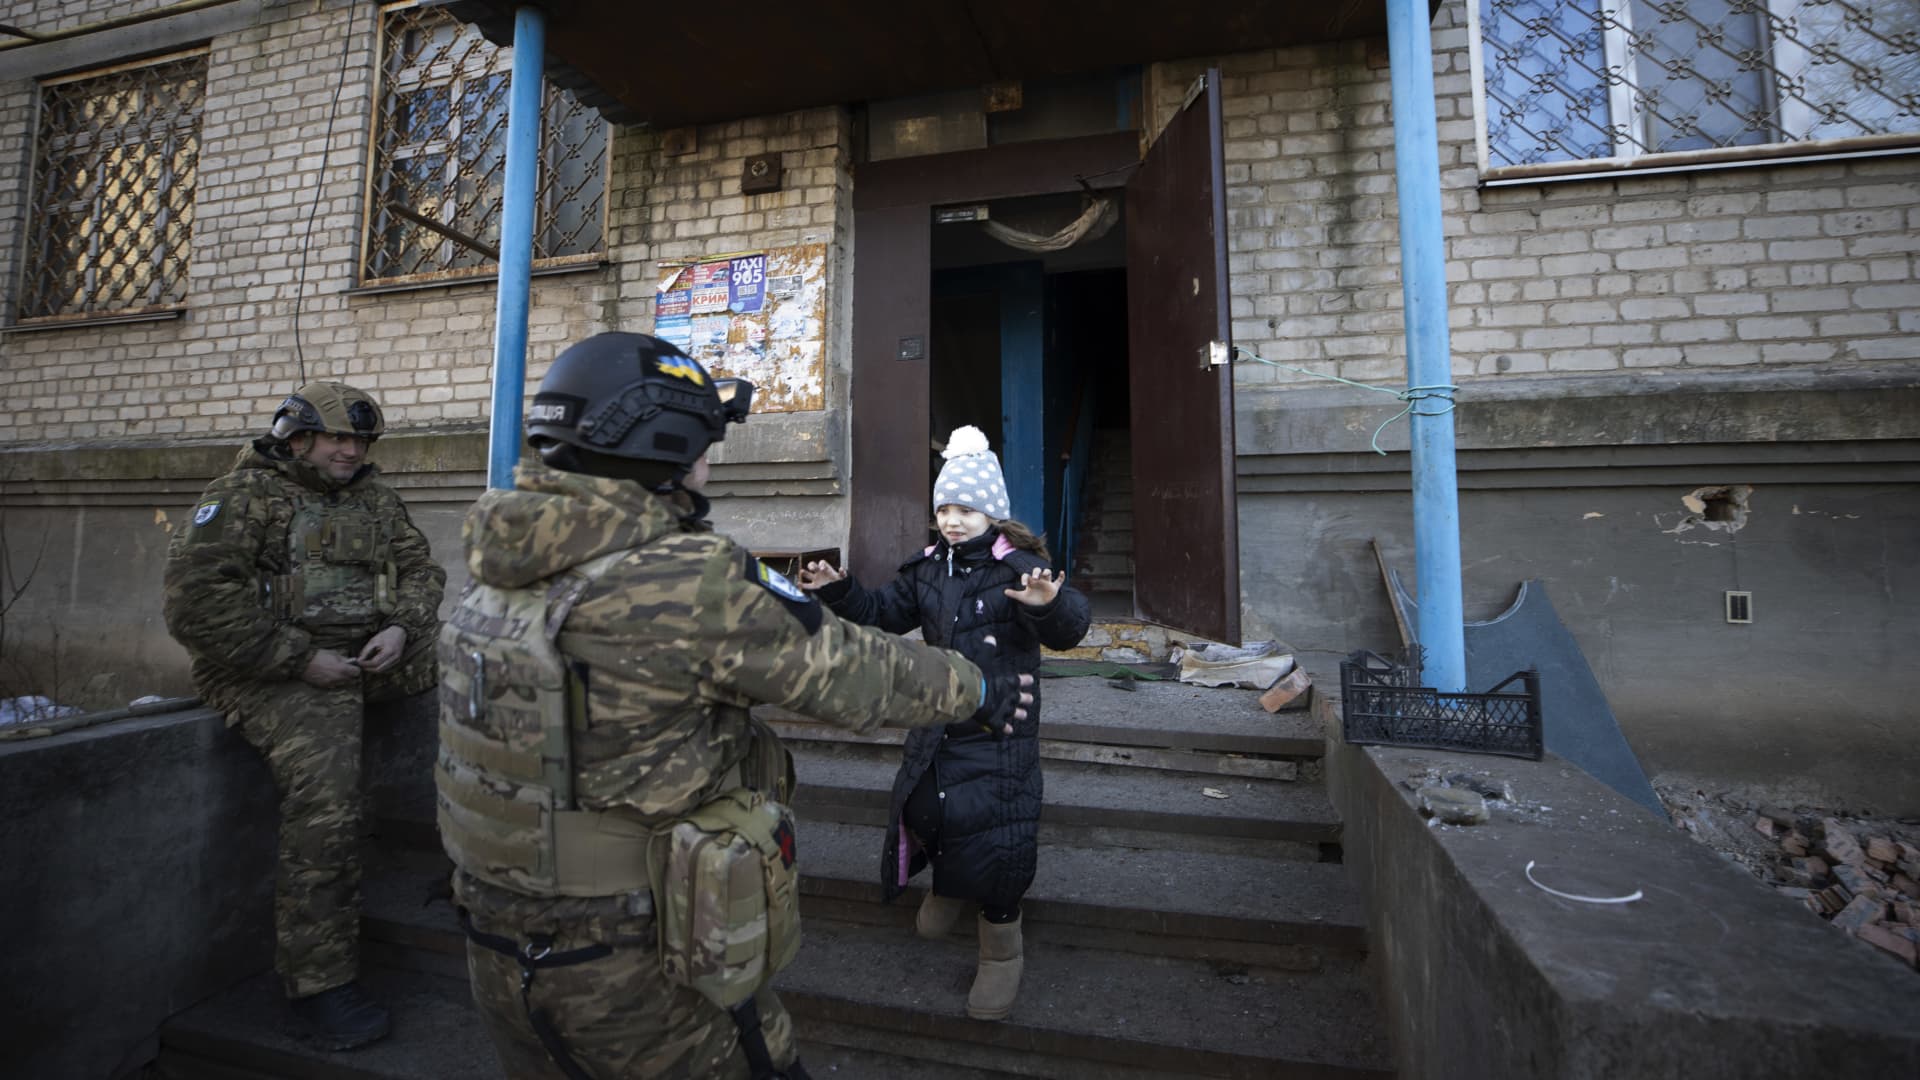 Anya, 7, plays with Ukrainian soldiers as she lives in a shelter with her family amid the war in Donetsk Oblast, Ukraine on January 25, 2023. 